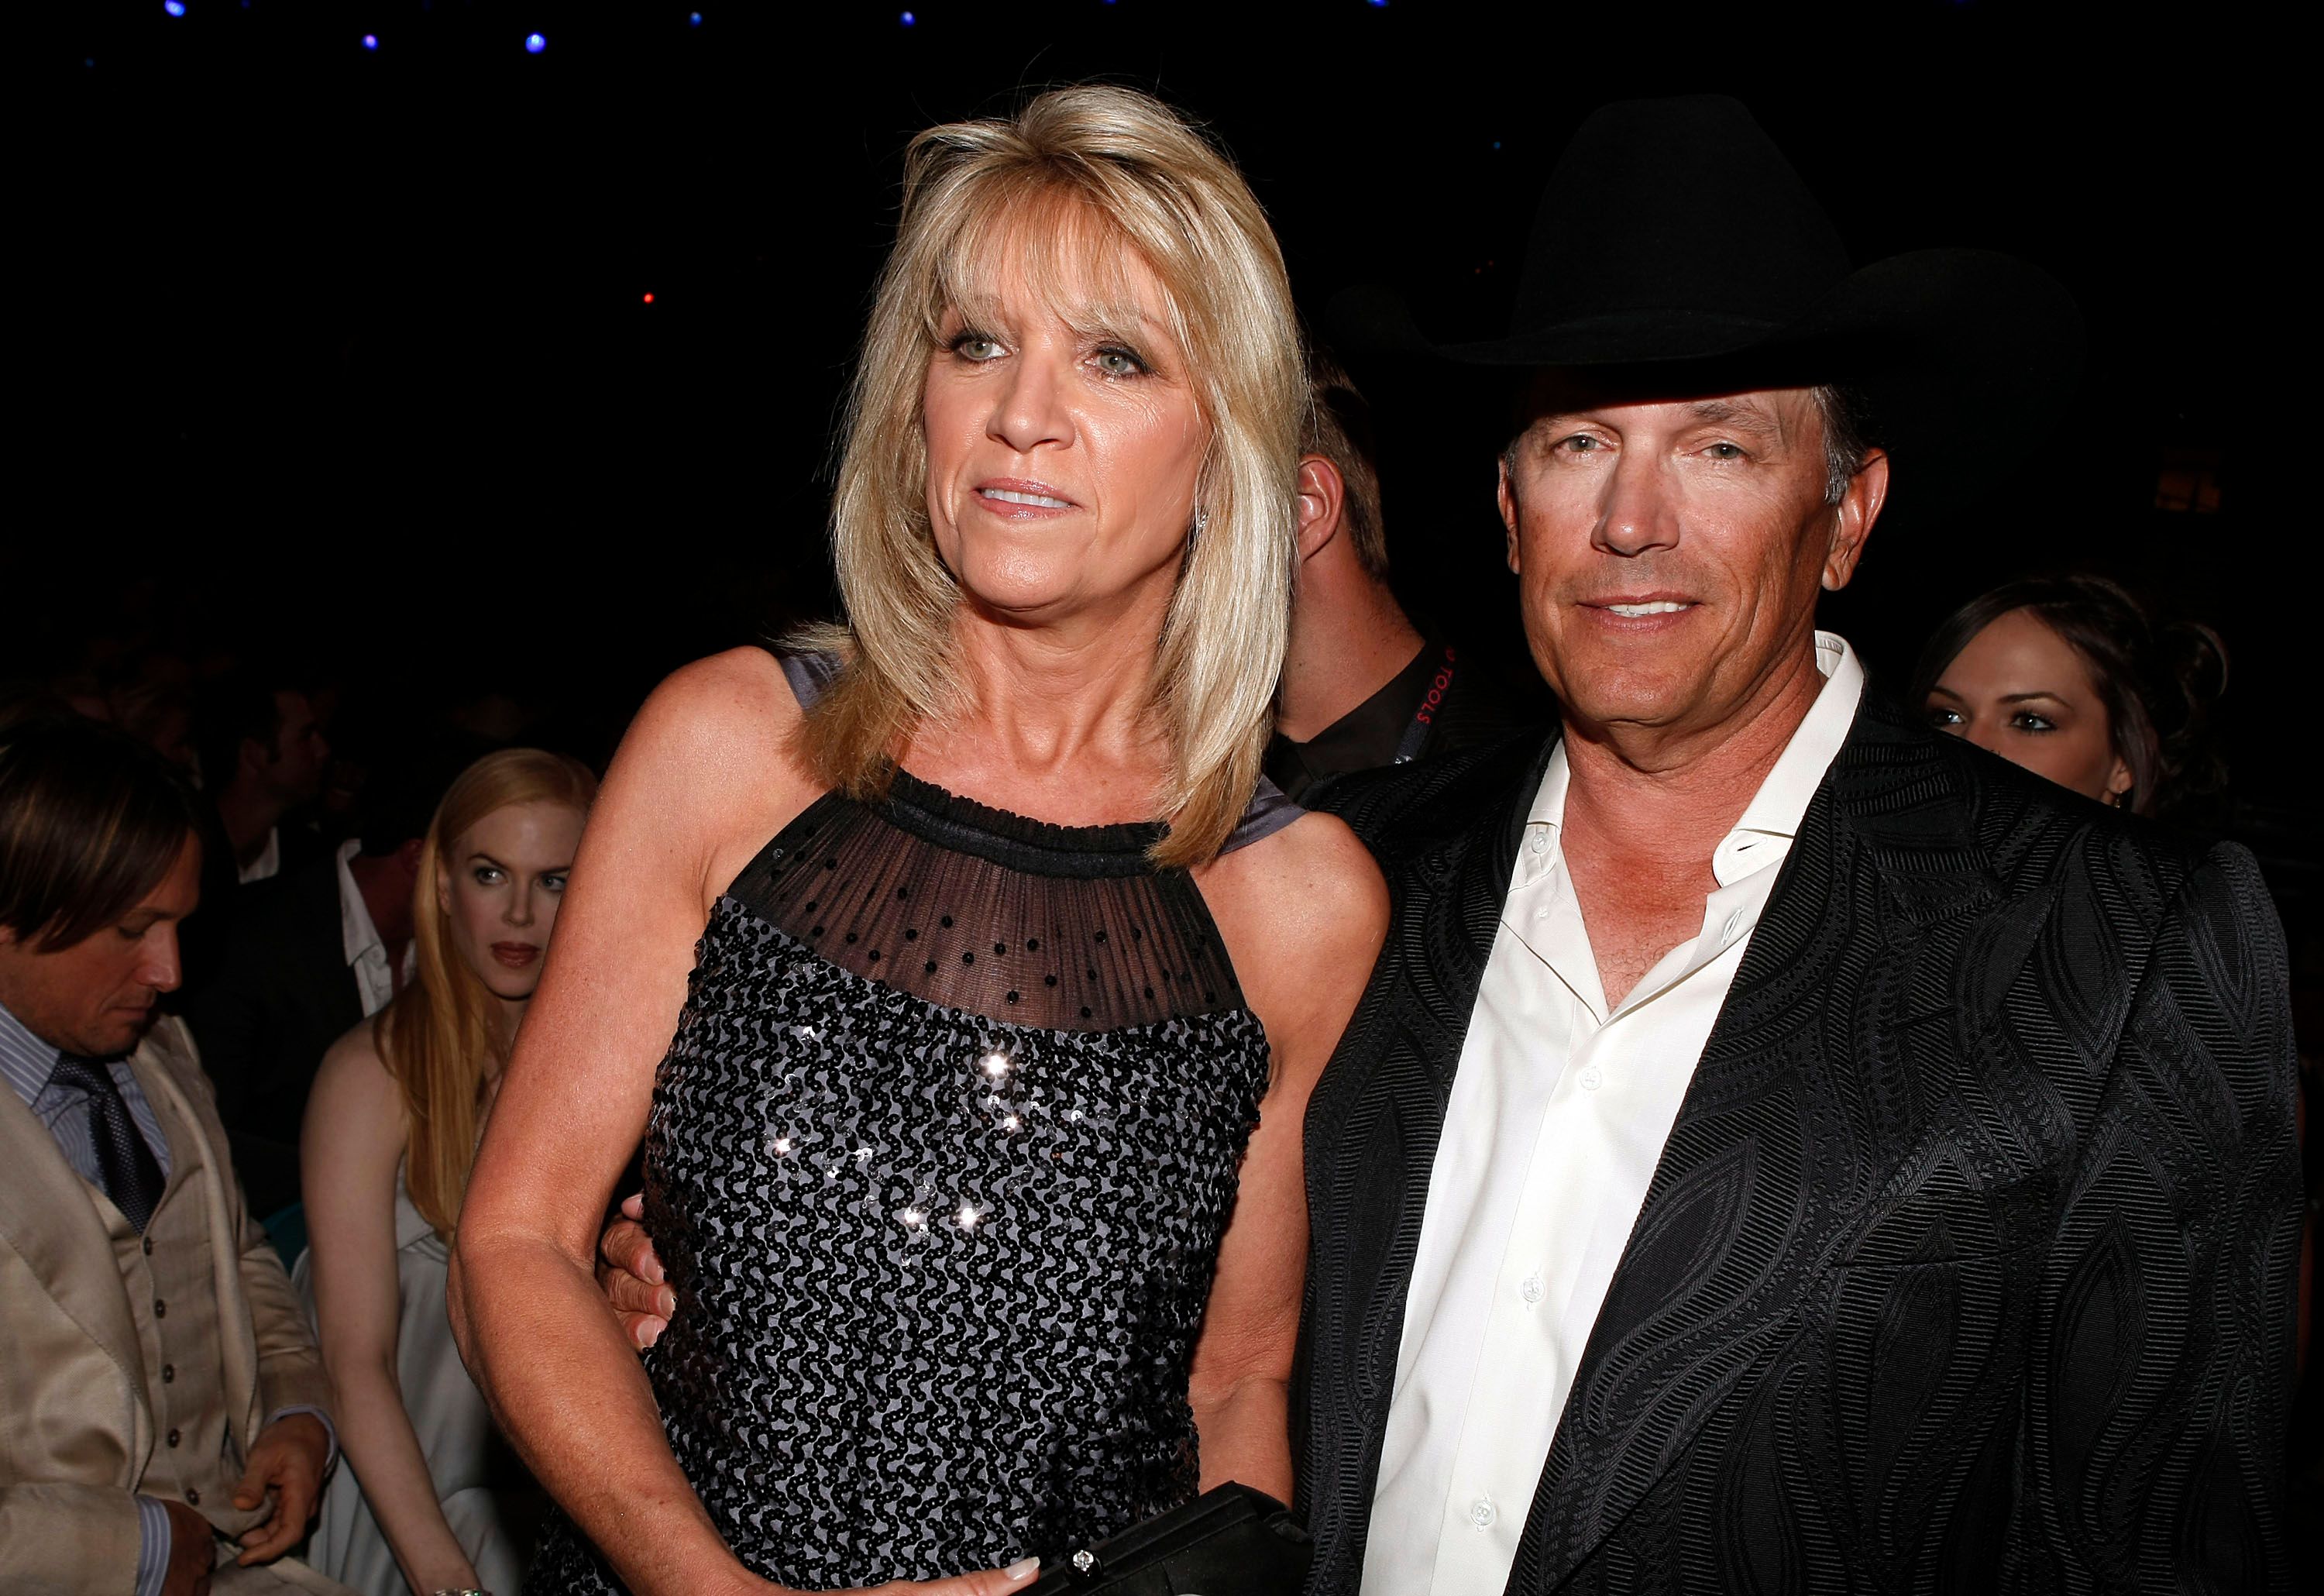 George Strait and Norma Strait during the 44th annual Academy Of Country Music Awards held at the MGM Grand on April 5, 2009 in Las Vegas, Nevada. | Source: Getty Images